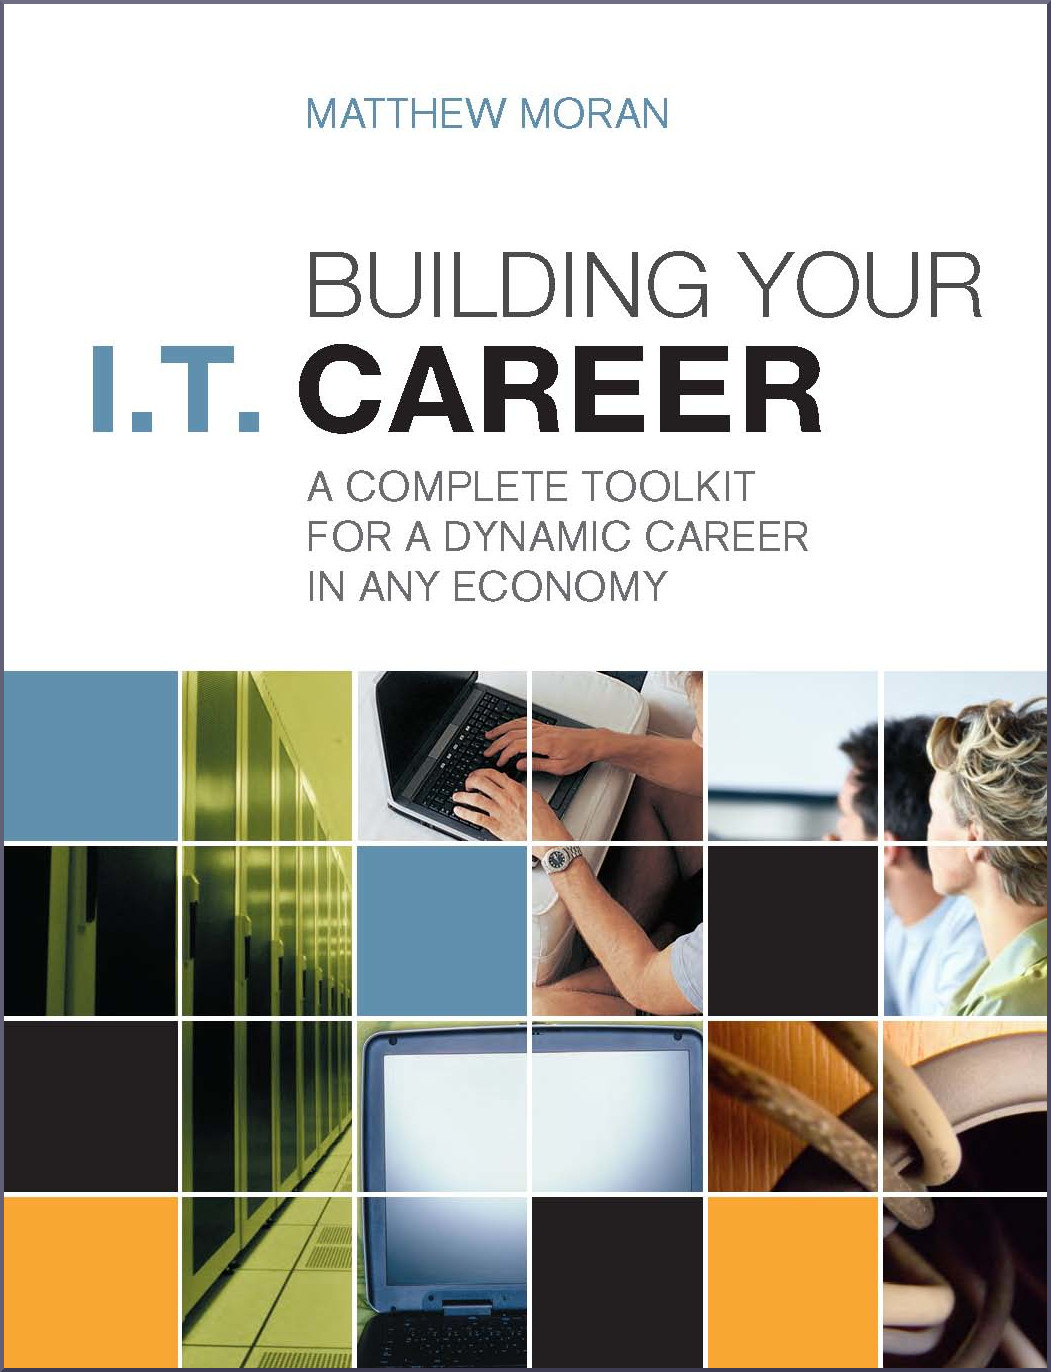 Image of the cover of my book, Building Your I.T. Career